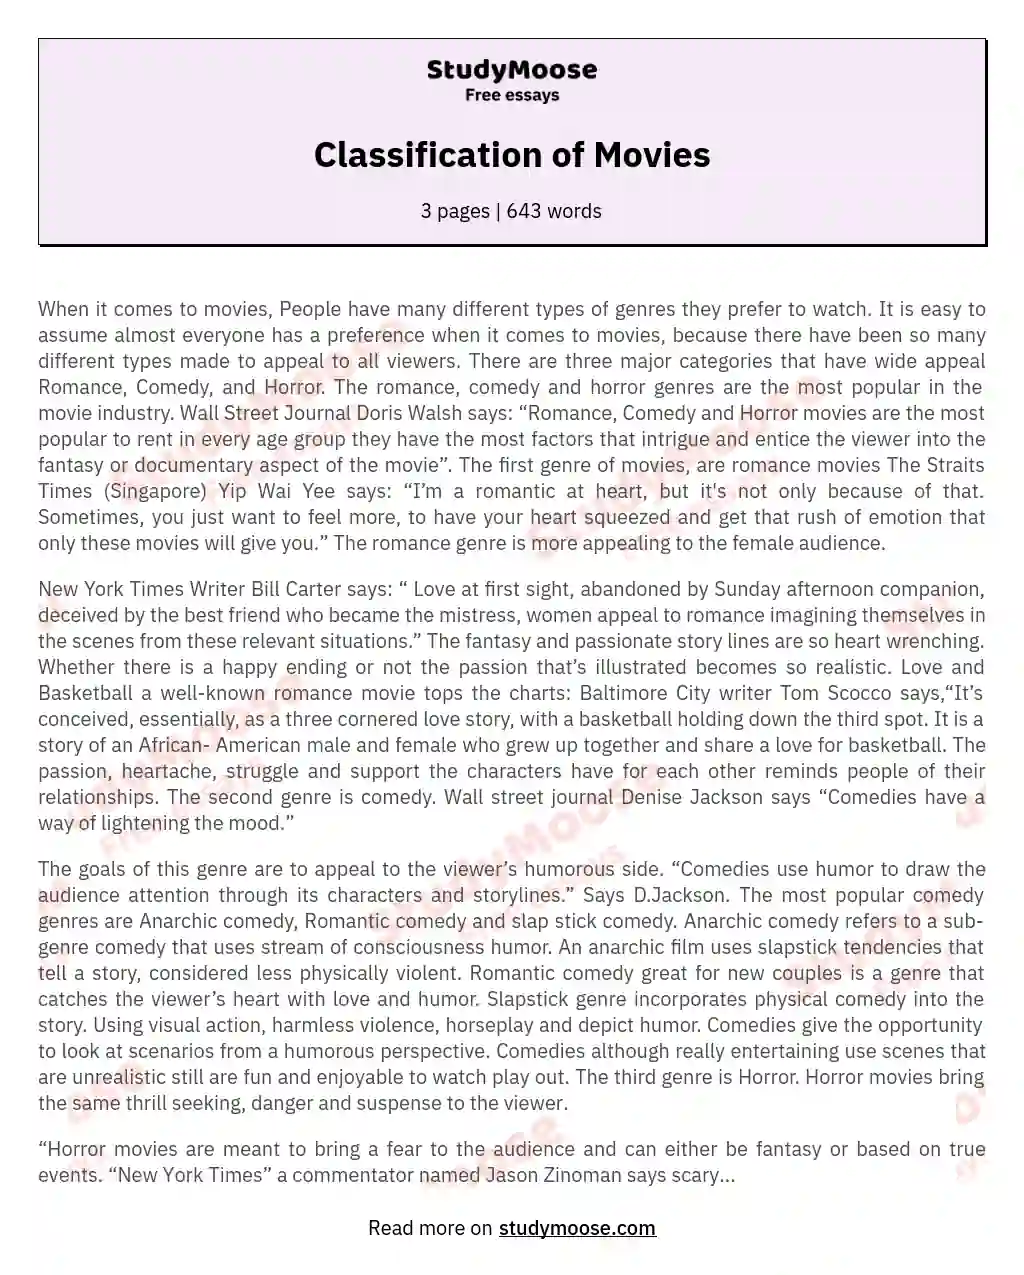 Classification of Movies essay